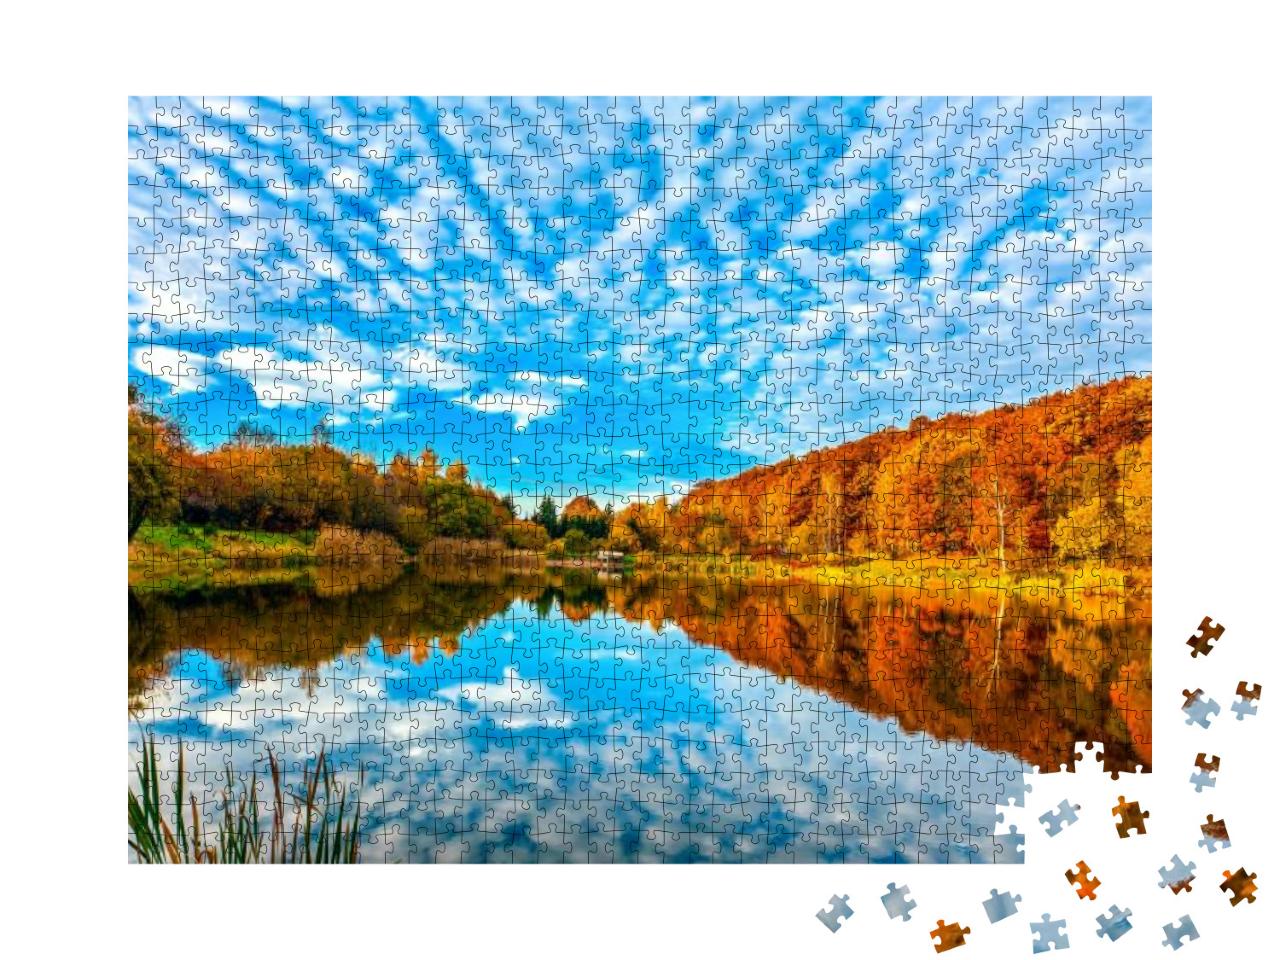 Lake Reflecting Sky in Autumn Landscape... Jigsaw Puzzle with 1000 pieces